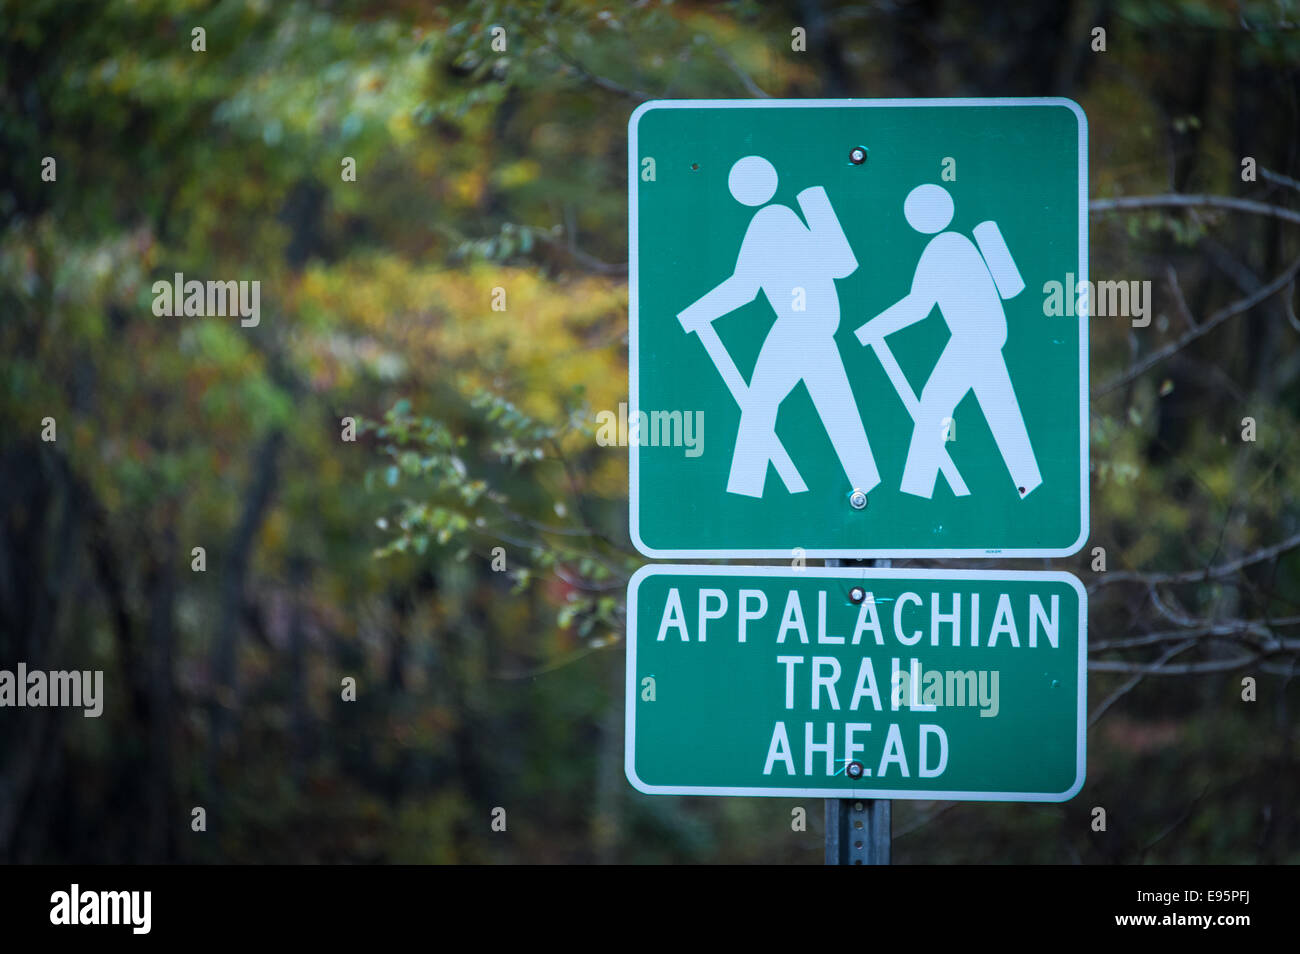 Appalachian Trail sign along the Richard B. Russell Scenic Highway in